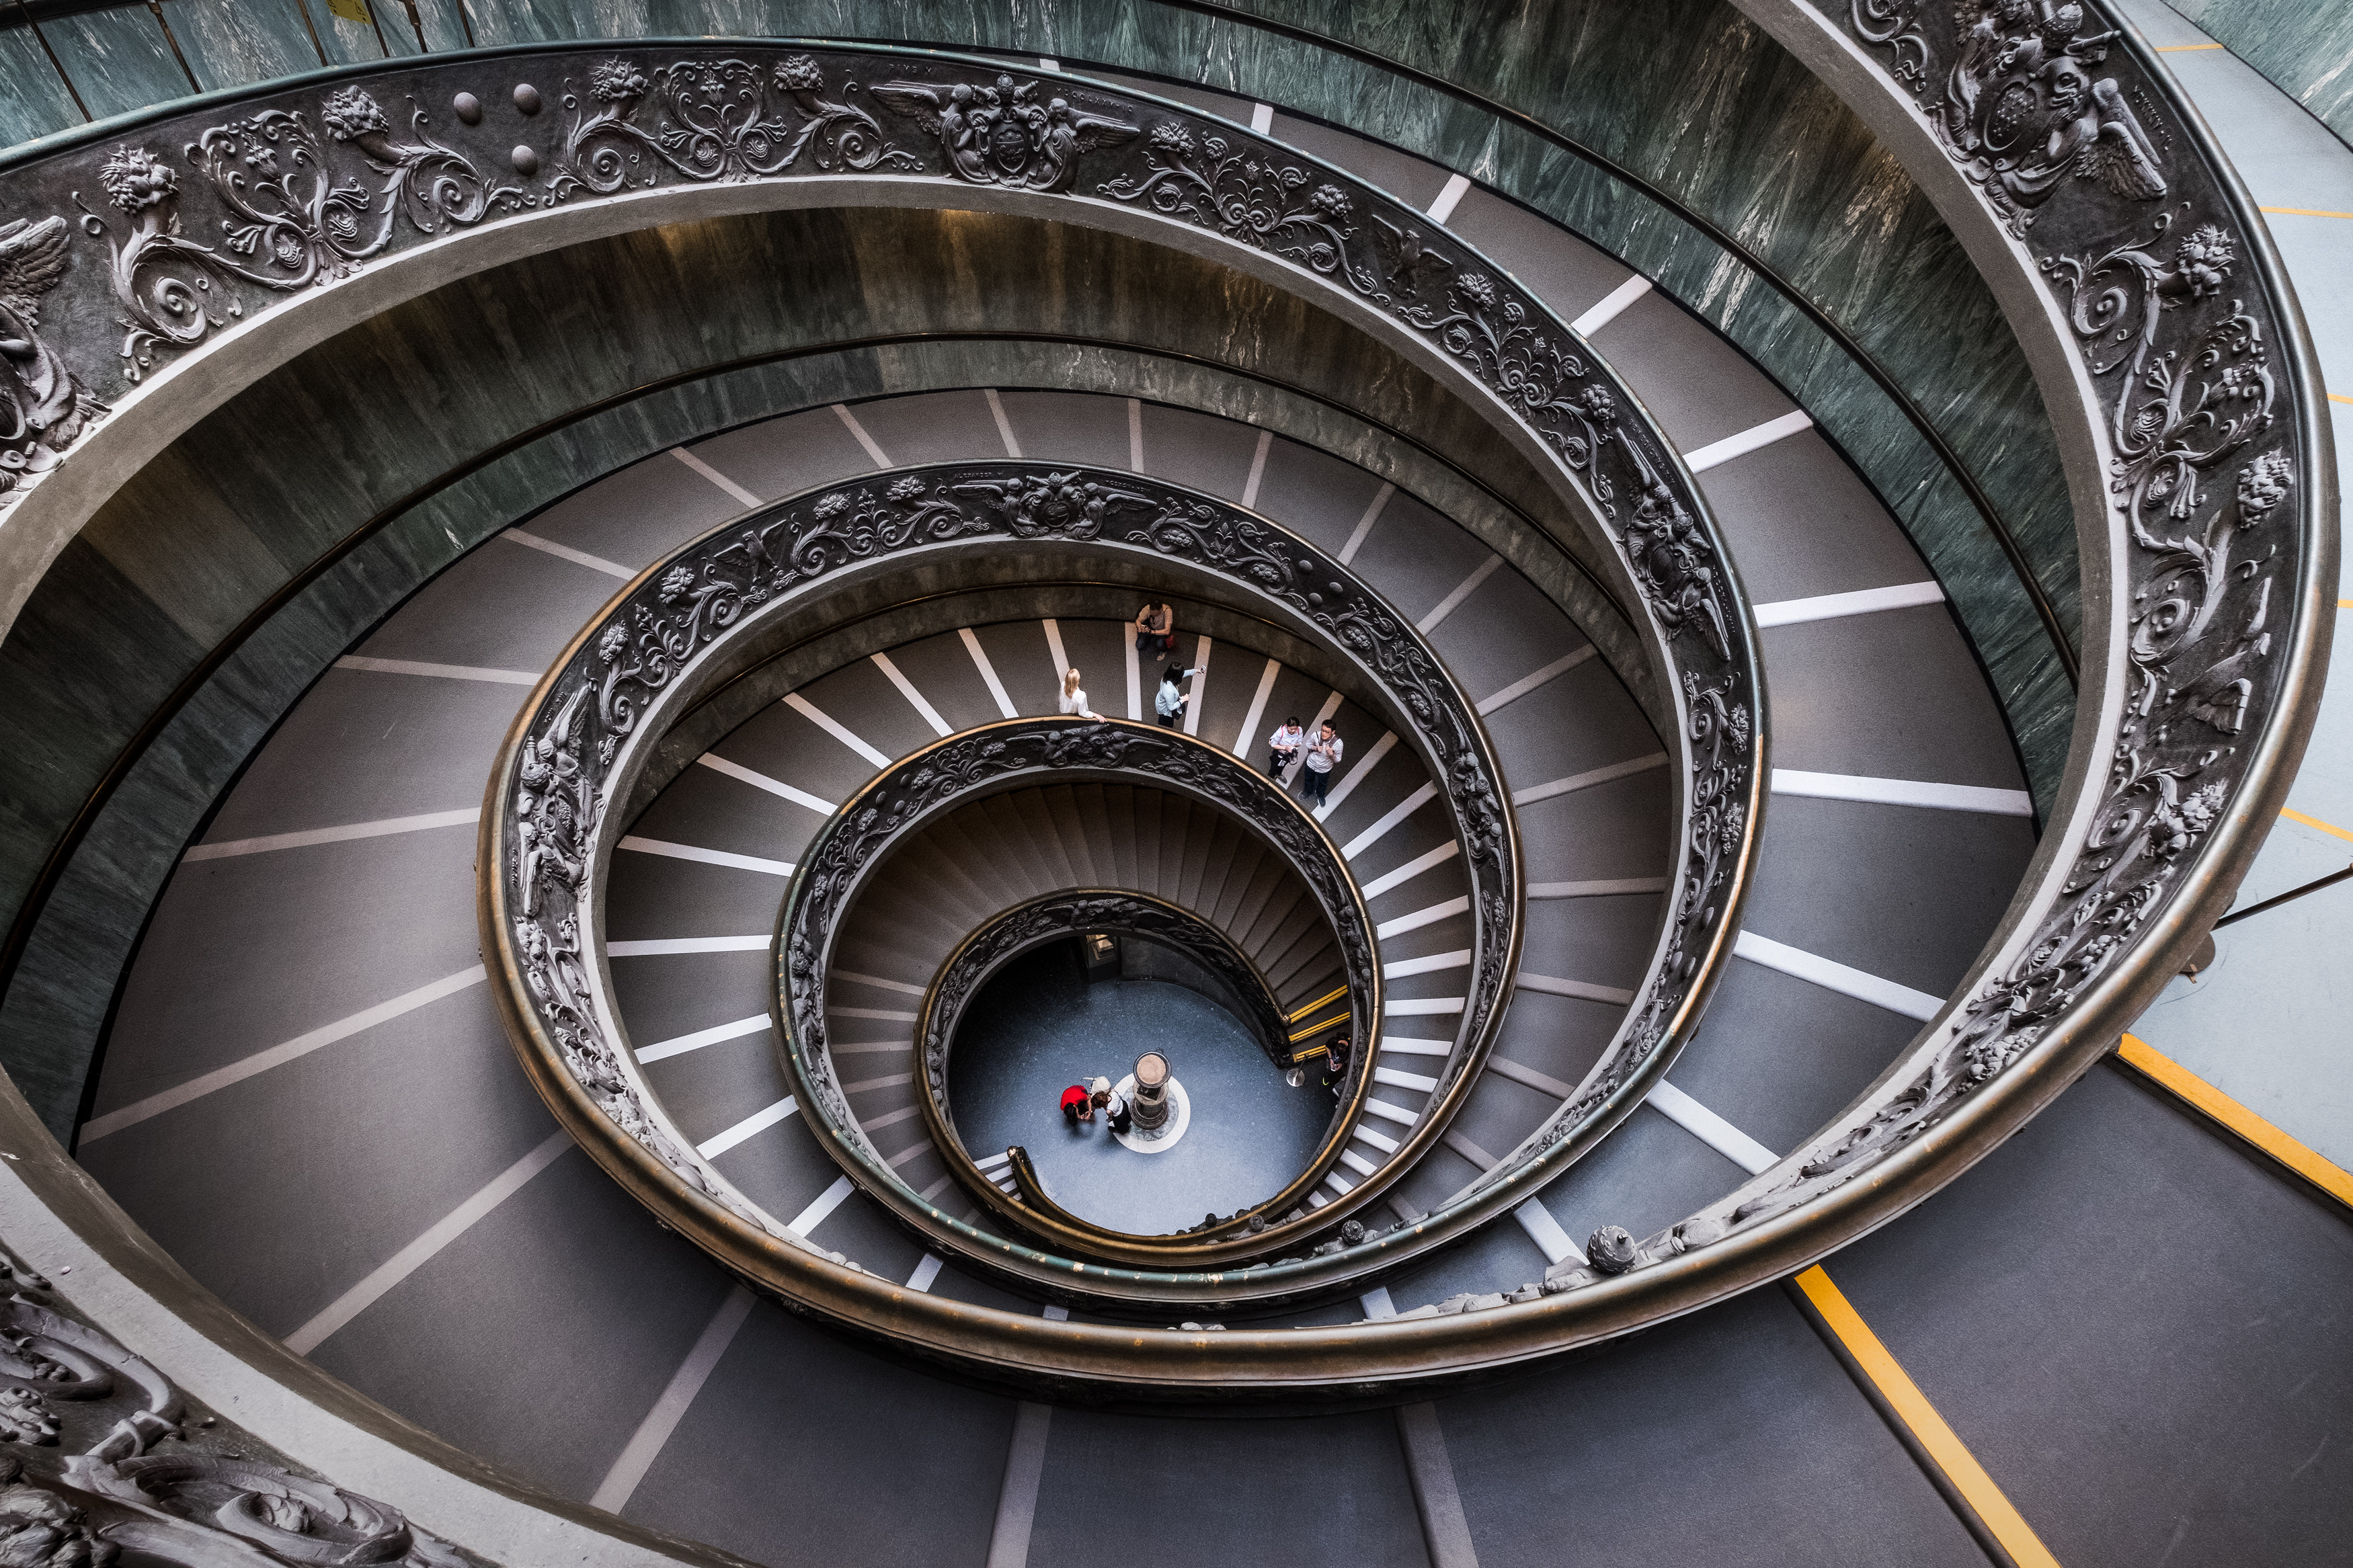 Plunging photo of a wide staircase in double helix, with some people